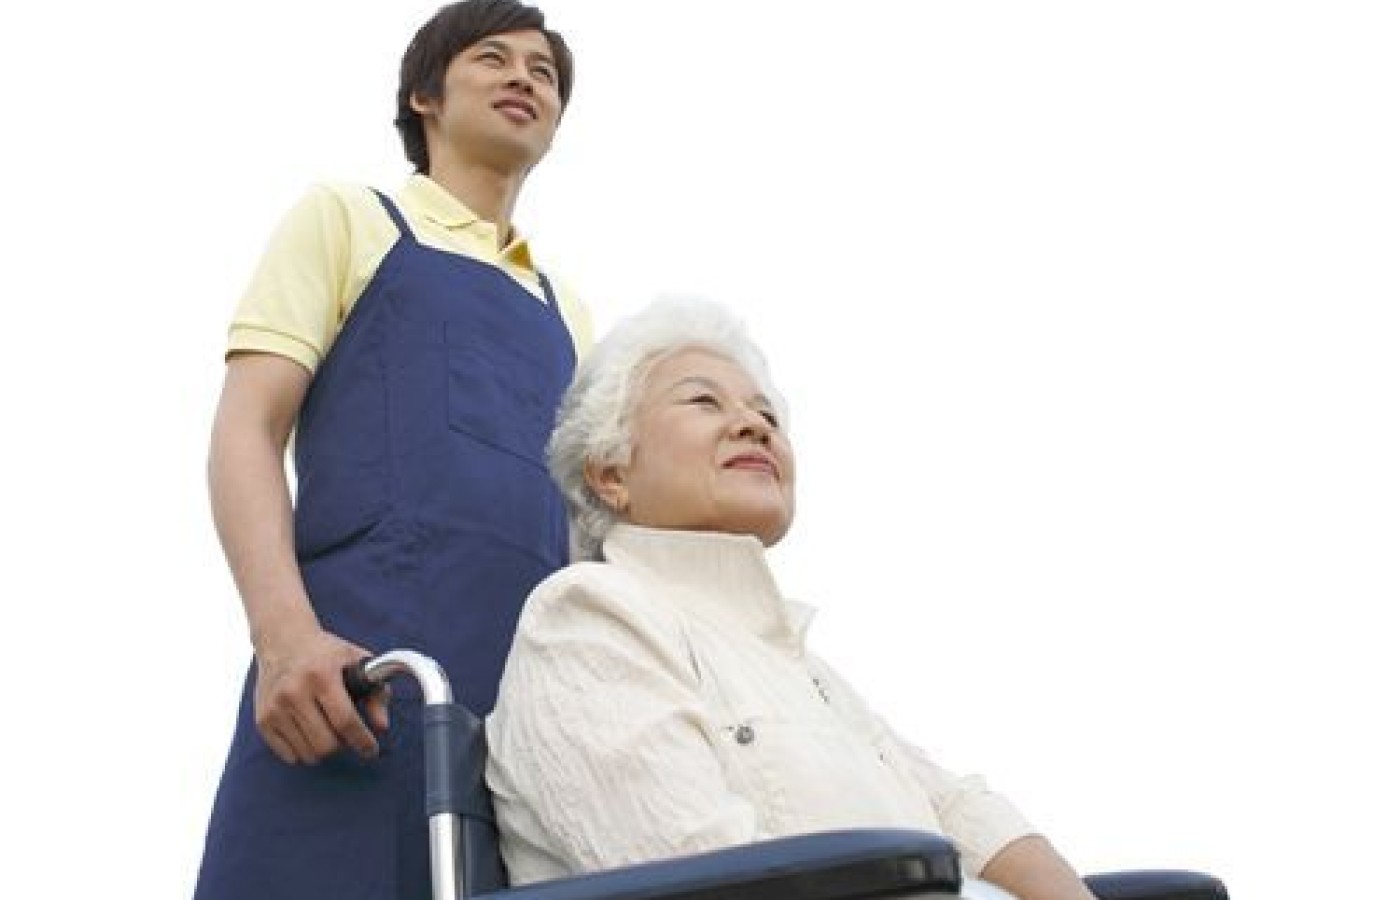 TCM & the Caregiving Population: Treatment Considerations & Our Vital Role